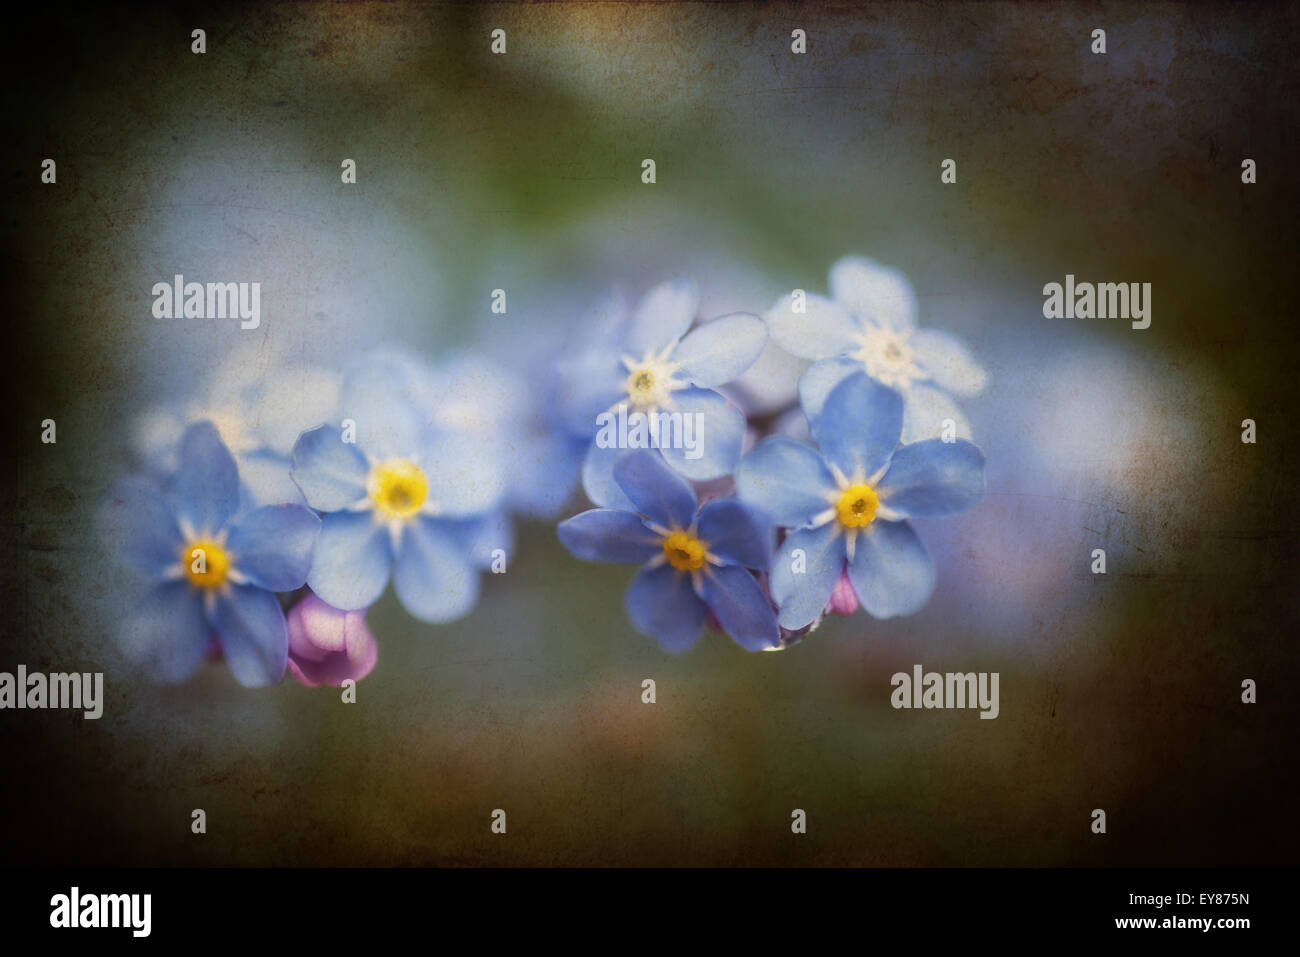 Beautiful forget-me-not Spring flowers with textured and vignette effect added Stock Photo